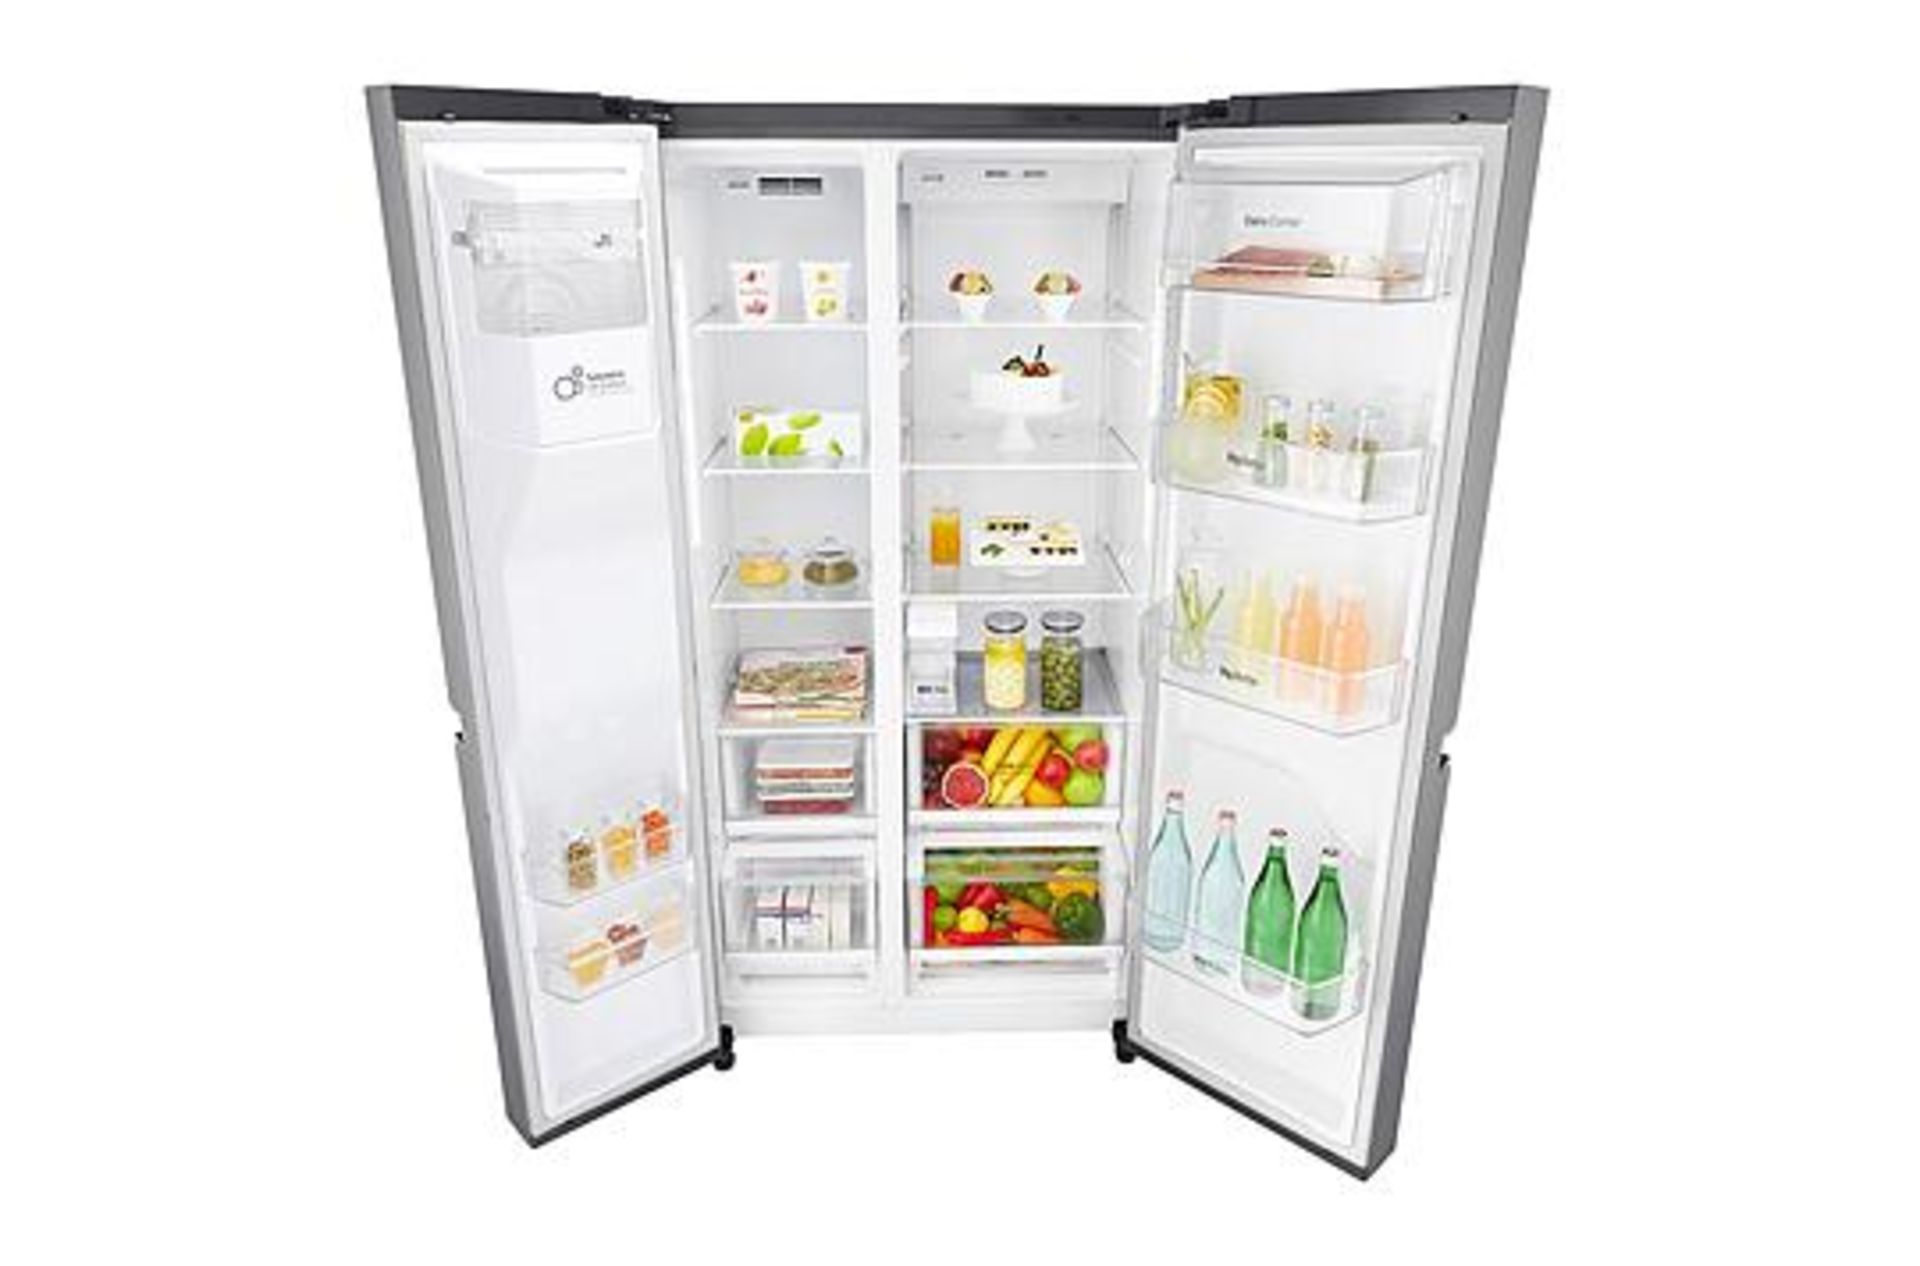 1 x LG GSL961 PXBV Stainless Steel American Style Fridge Freezer With Water and Ice Dispenser - - Image 6 of 8